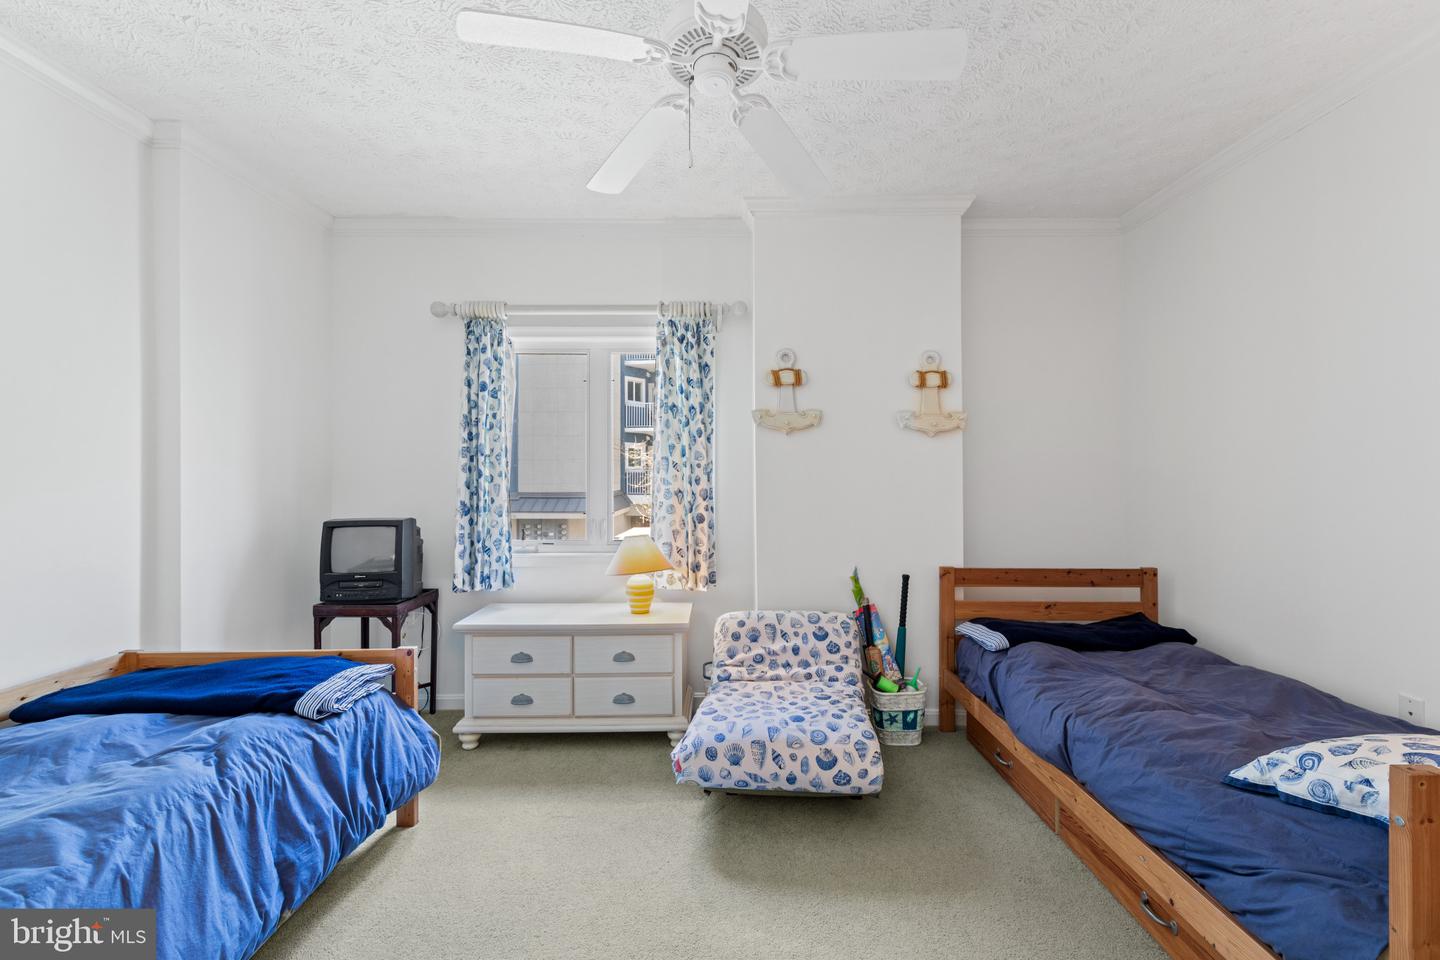 MDWO2015322-802986556192-2024-04-16-15-31-31 14 45th St #203 | Ocean City, MD Real Estate For Sale | MLS# Mdwo2015322  - 1st Choice Properties